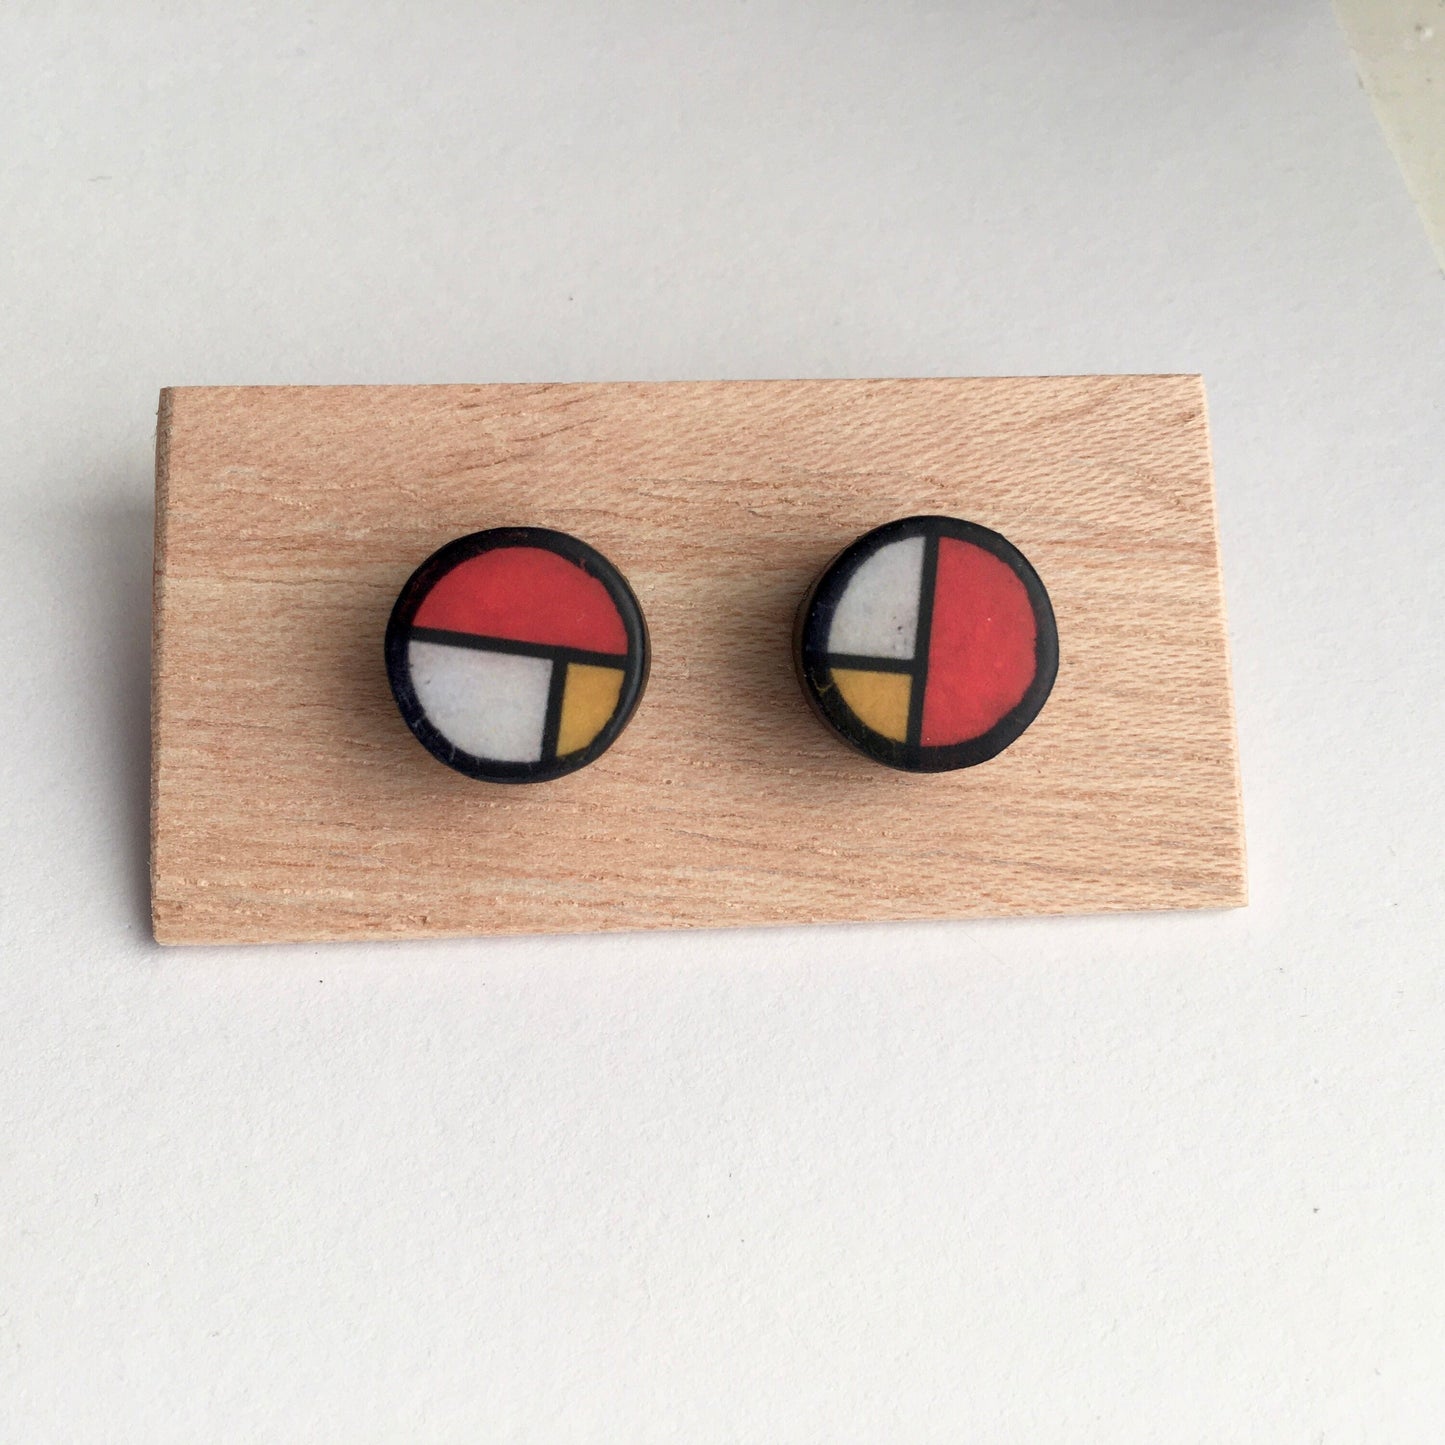 Mondrian men’s earrings. Sterling silver and sustainable wood stud earrings. Father’s Day gift.